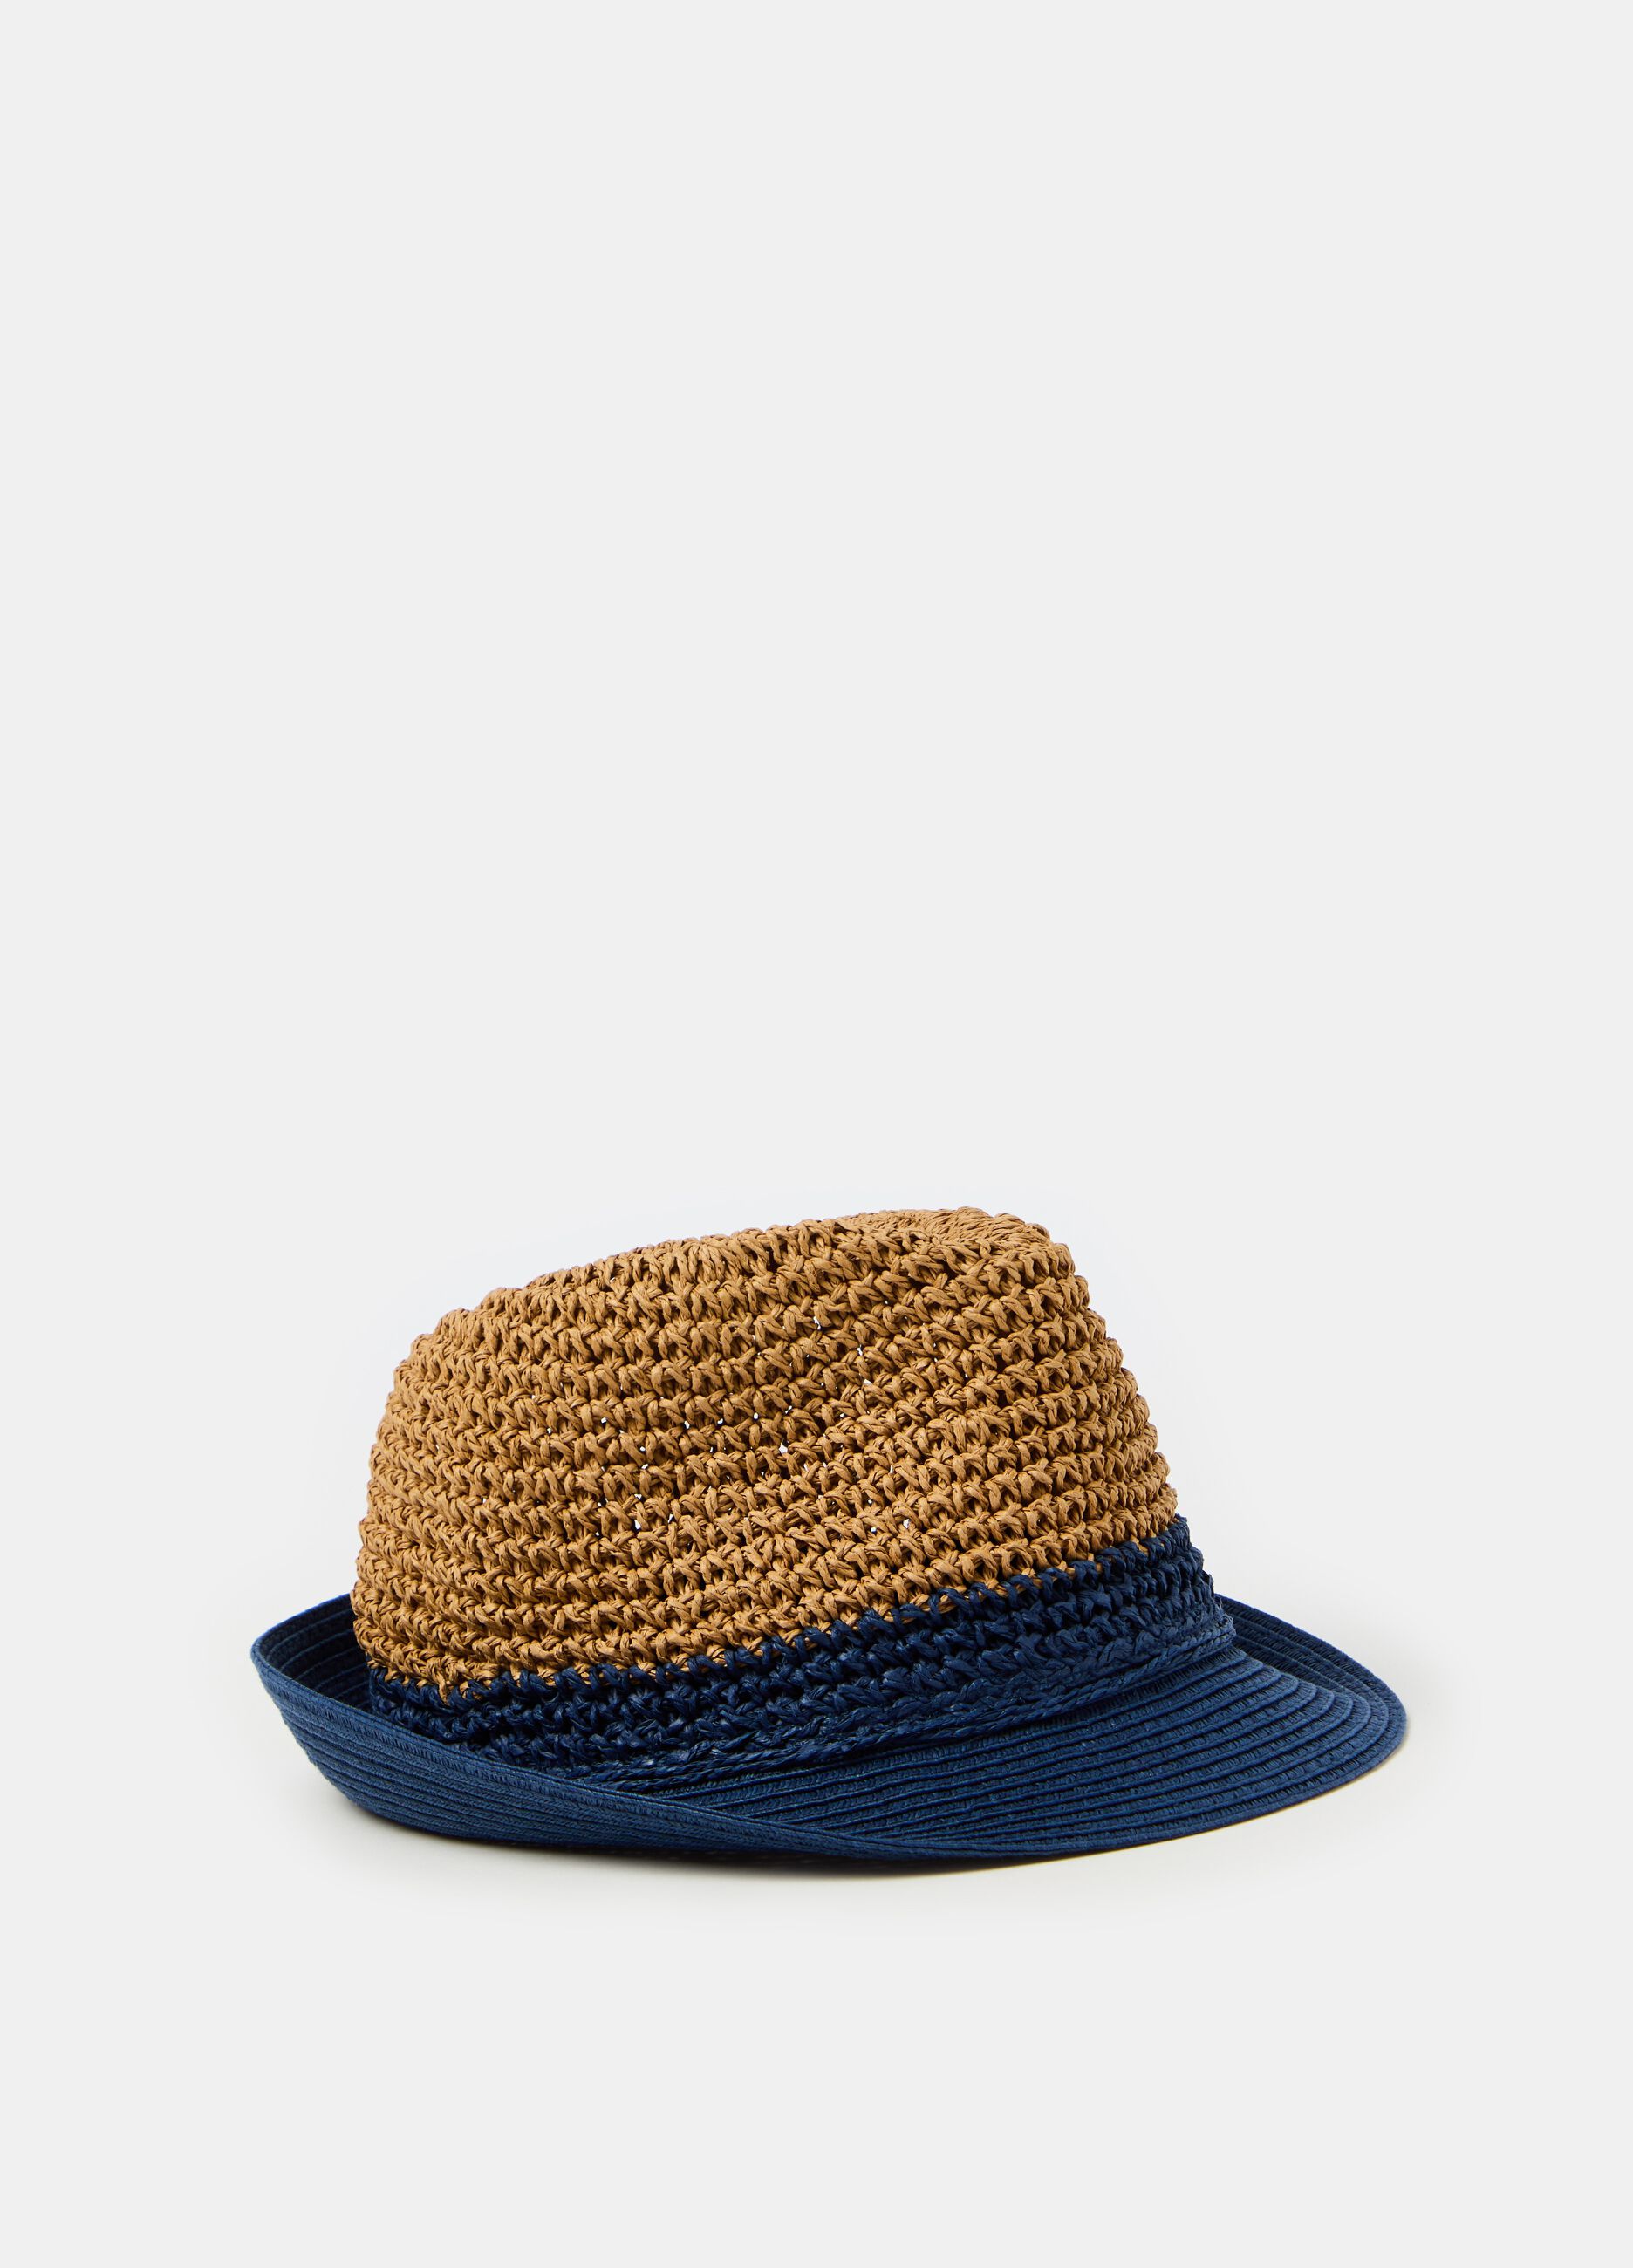 Trilby hat with contrasting brim